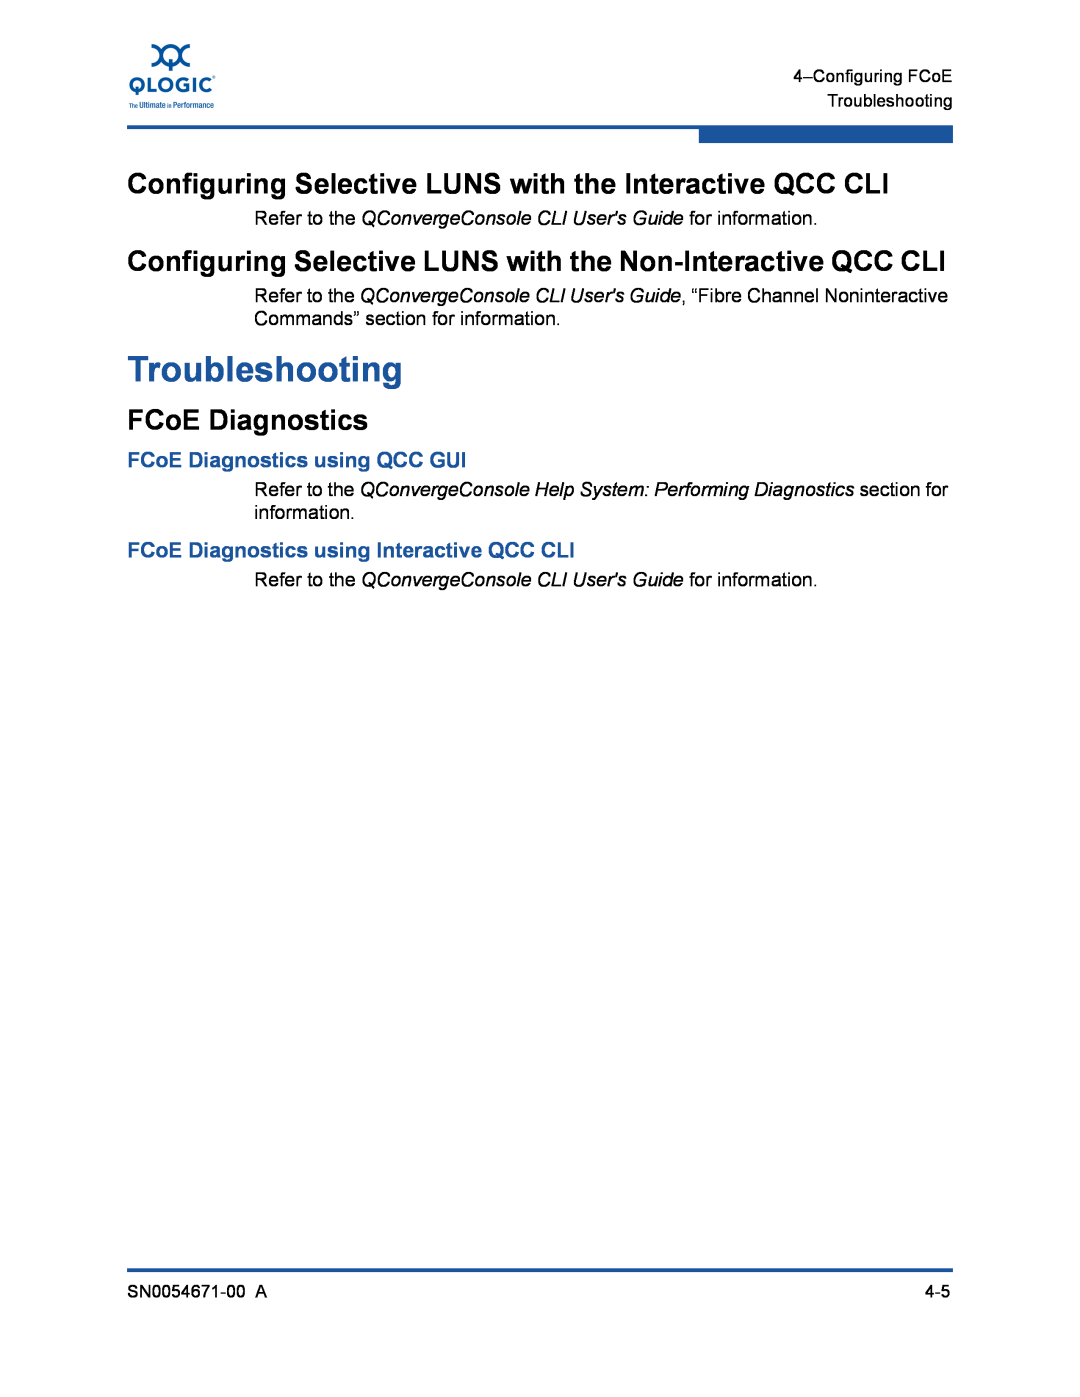 Q-Logic 3200, 8200 manual Troubleshooting, Configuring Selective LUNS with the Interactive QCC CLI, FCoE Diagnostics 